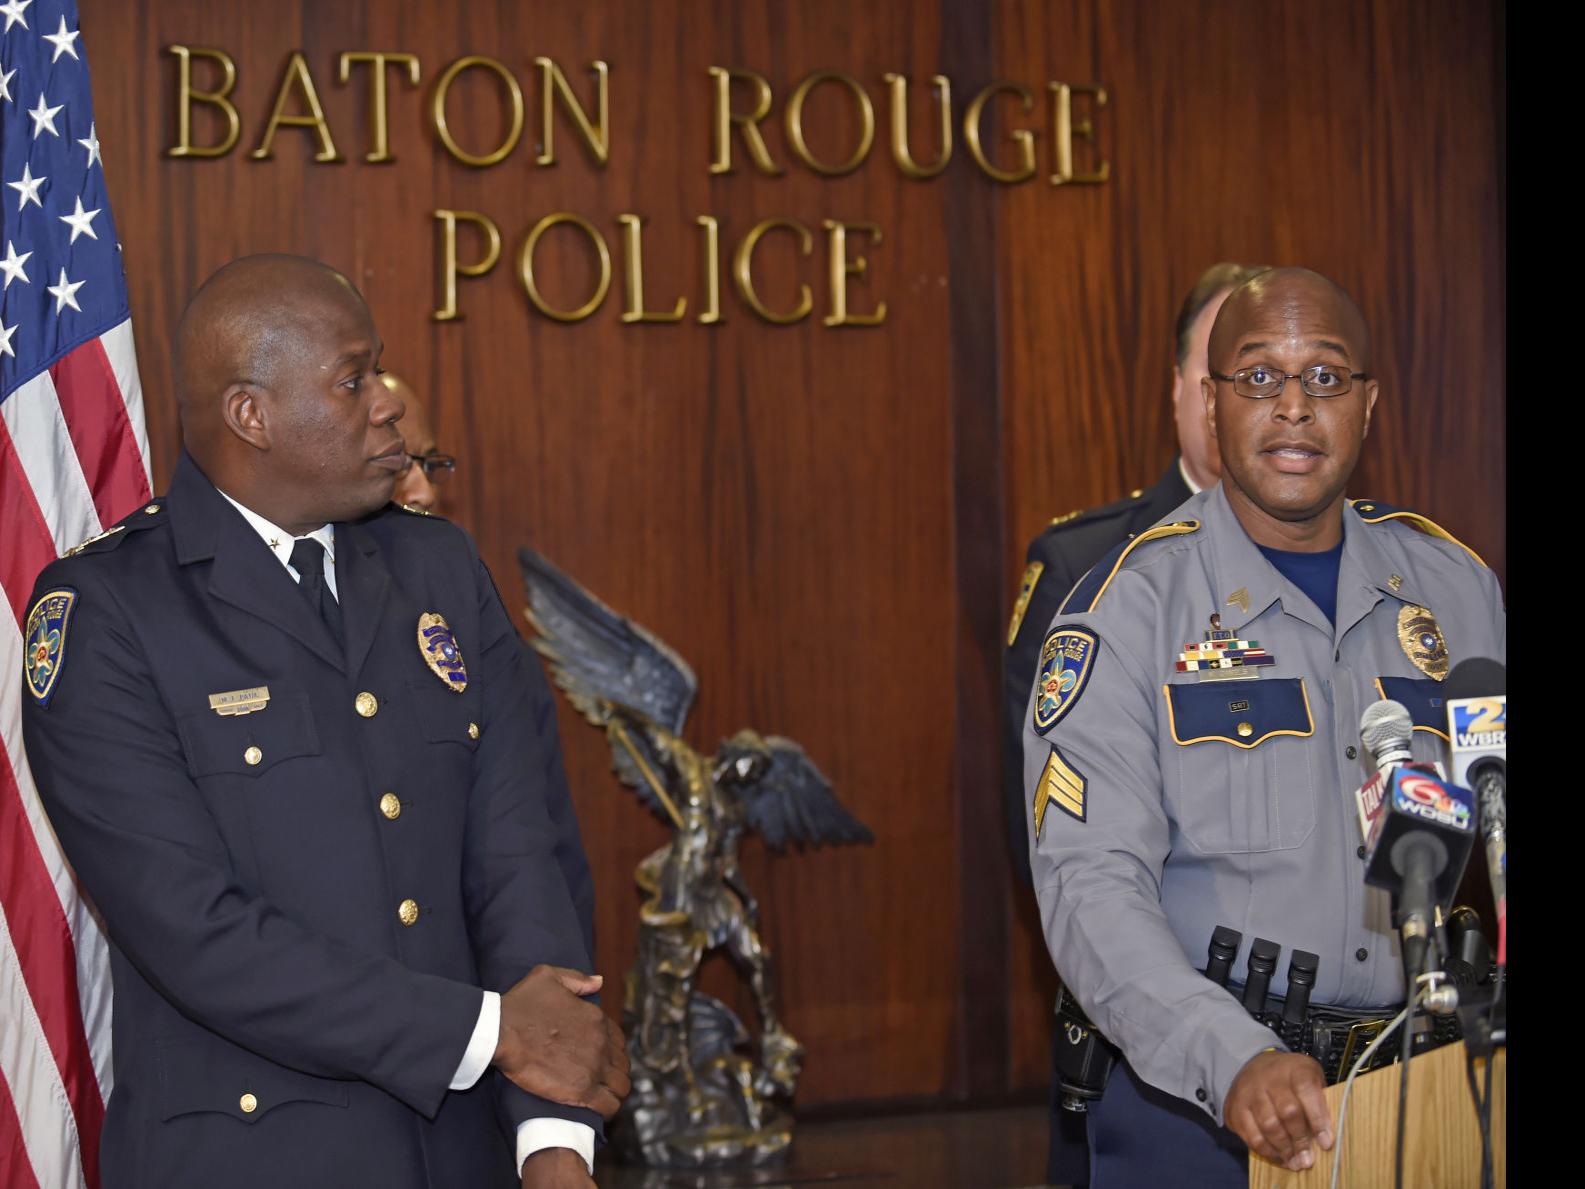 No basis to claims that black Baton Rouge officers get lighter discipline, leaders say